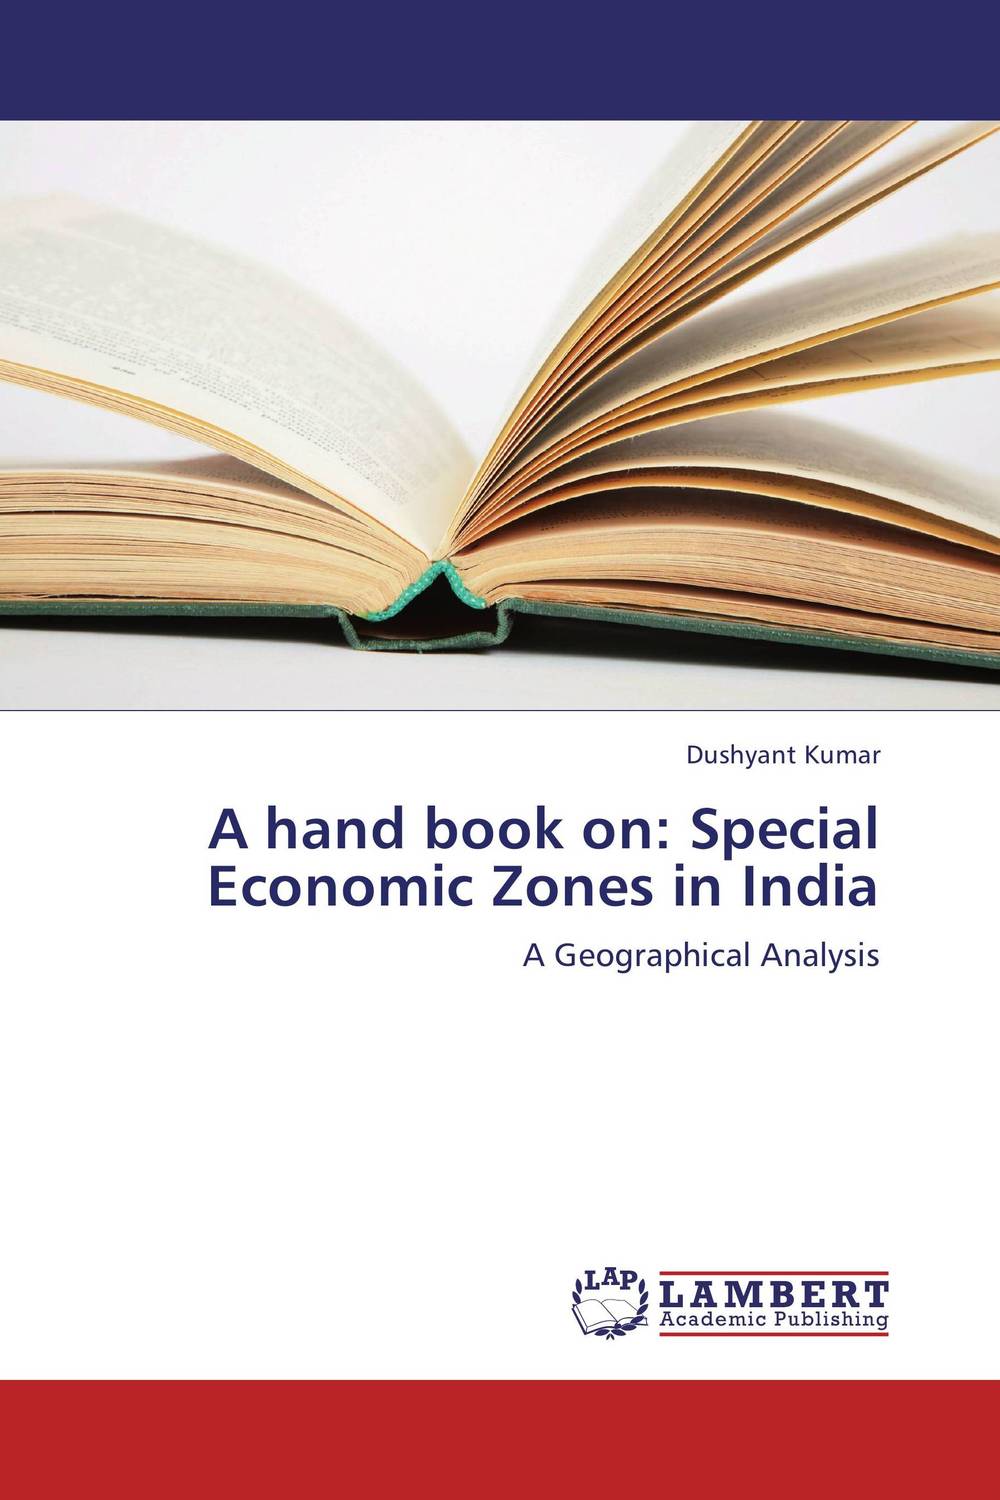 A hand book on: Special Economic Zones in India